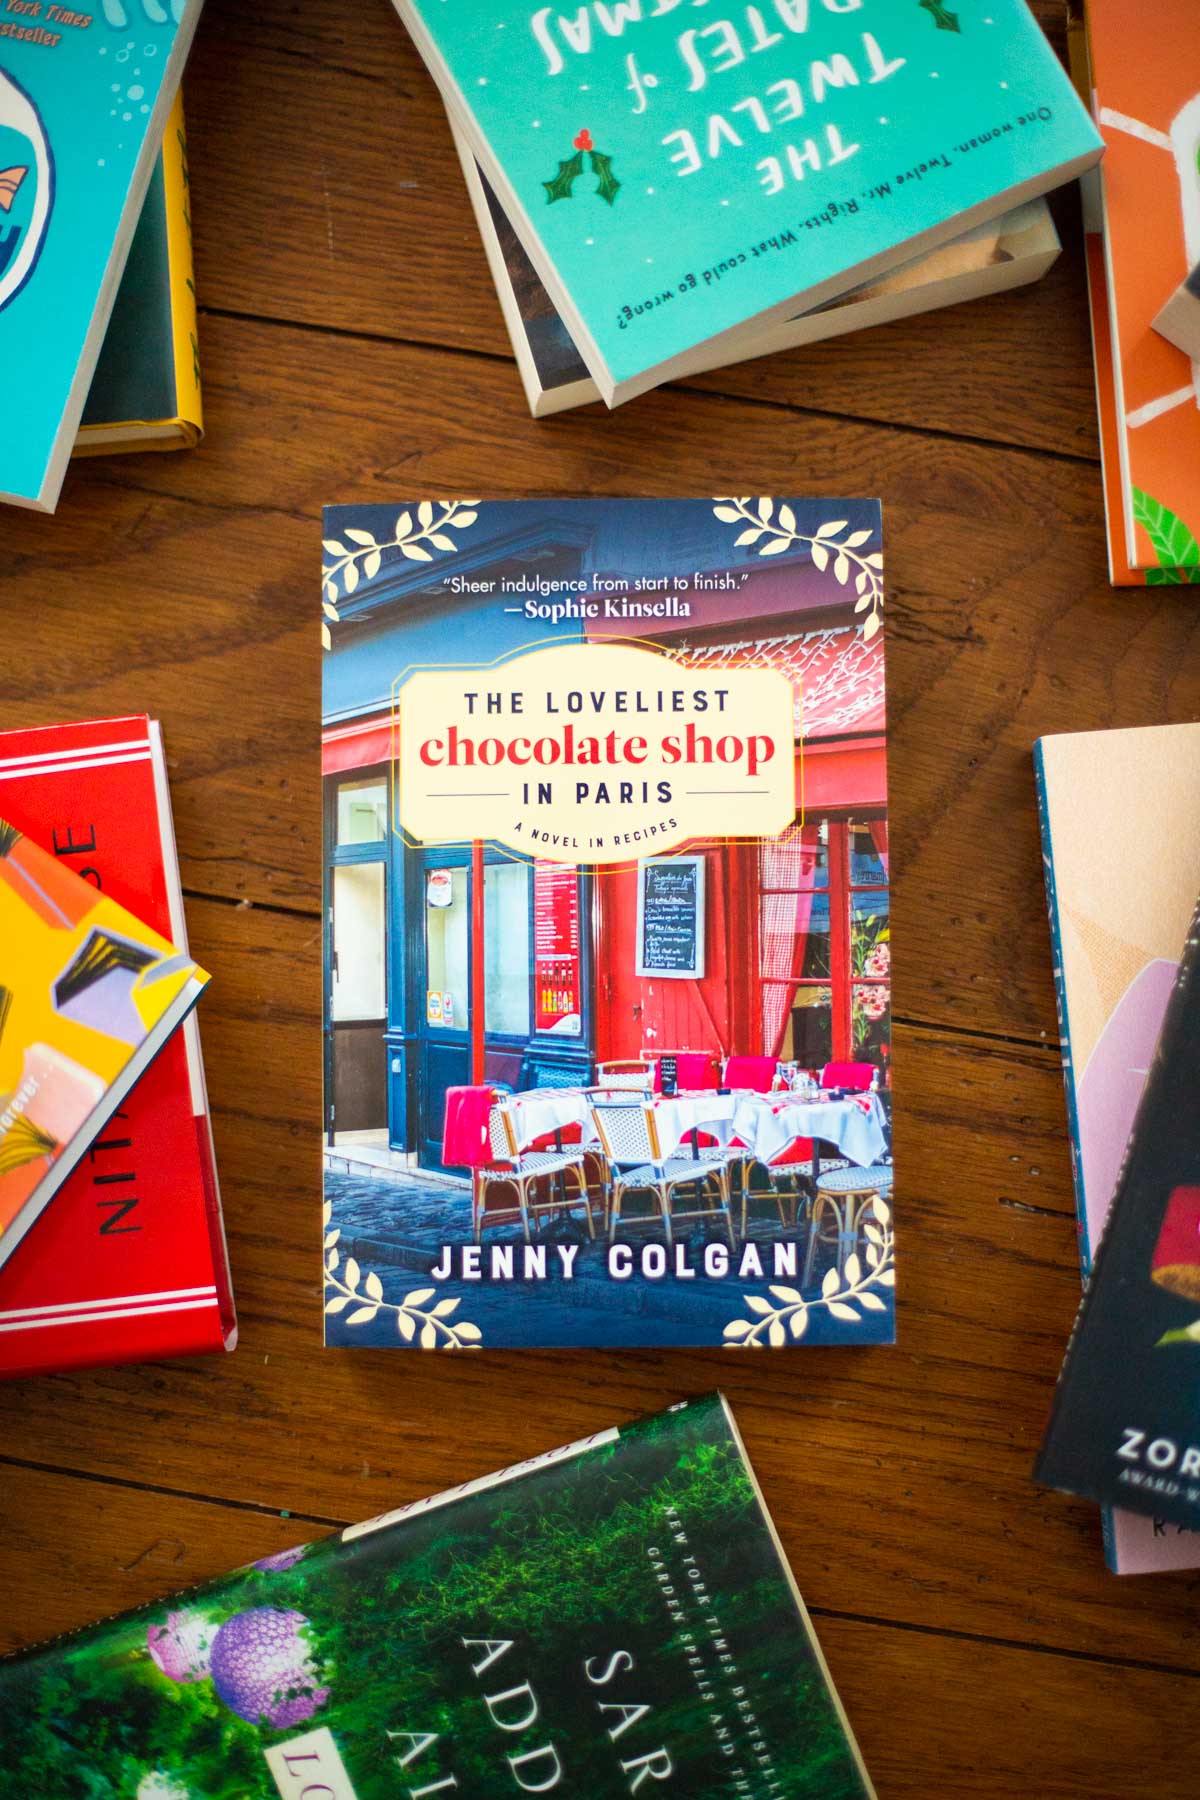 A copy of The Loveliest Chocolate Shop in Paris by Jenny Colgan sits on a table.